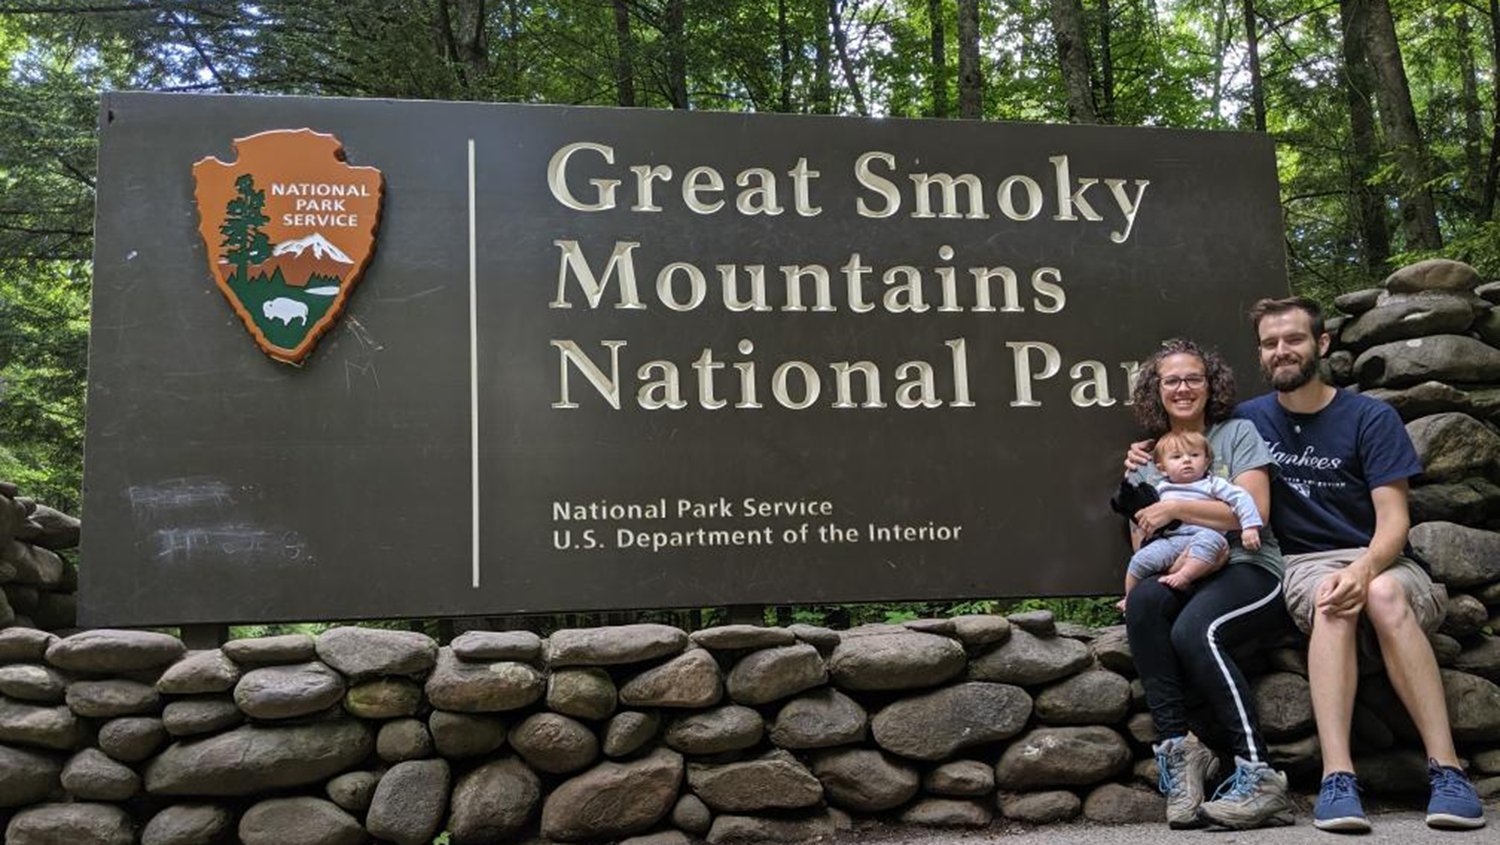 Austin and family in front of Great Smoky Mountains National Park sign